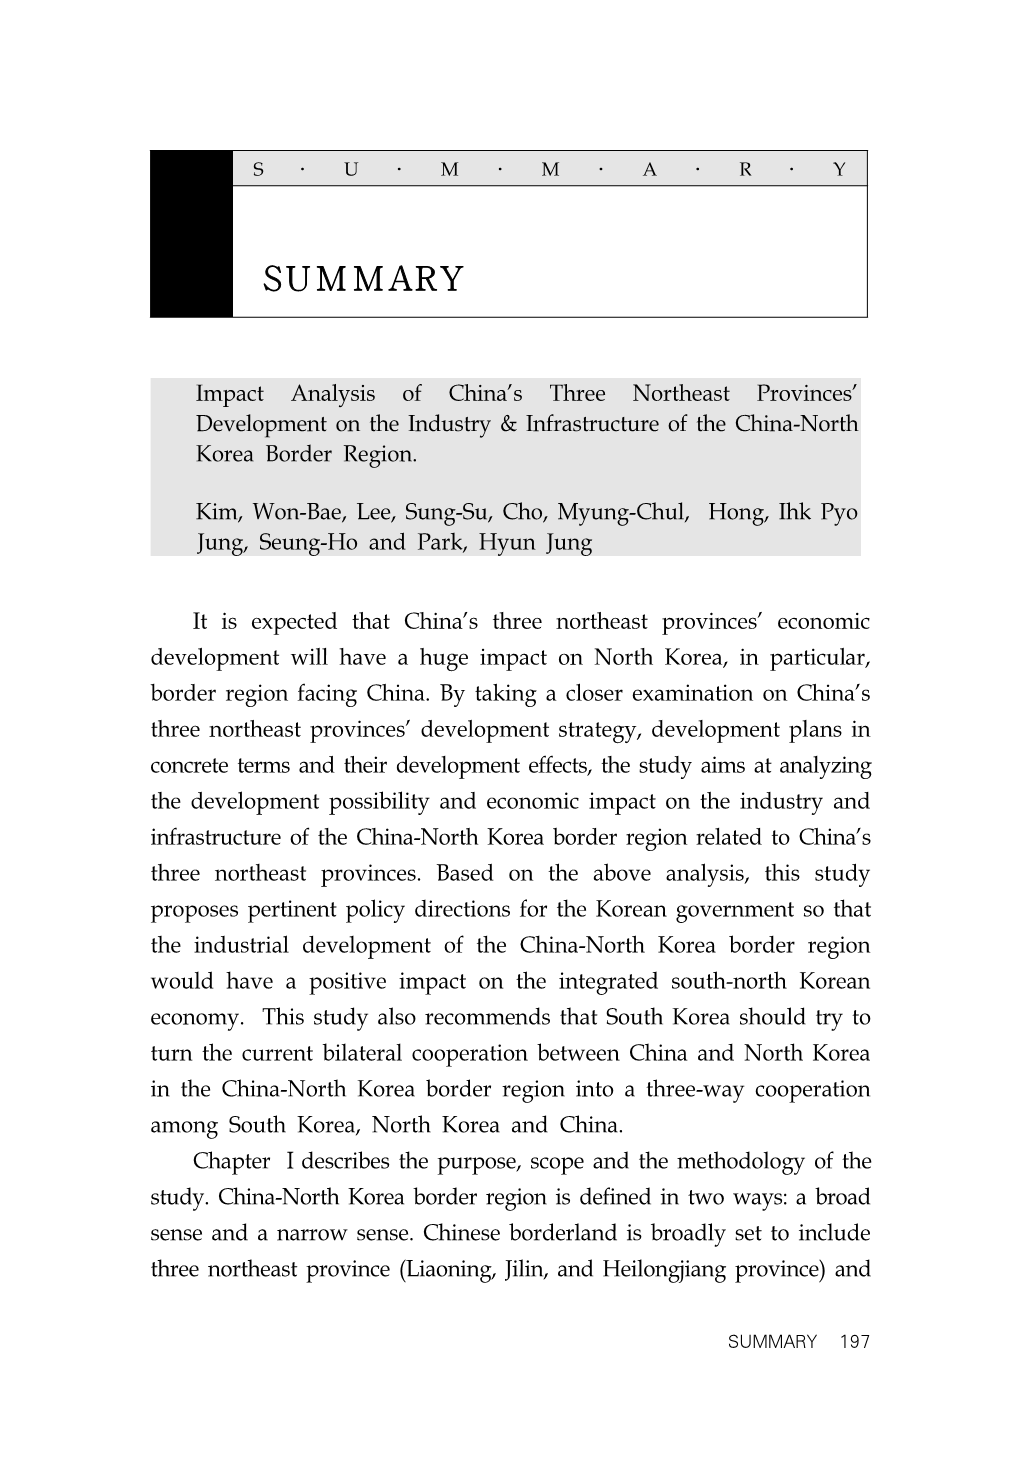 Impact Analysis of China's Three Northeast Provinces' Development on the Industry and Infrastructure of the China